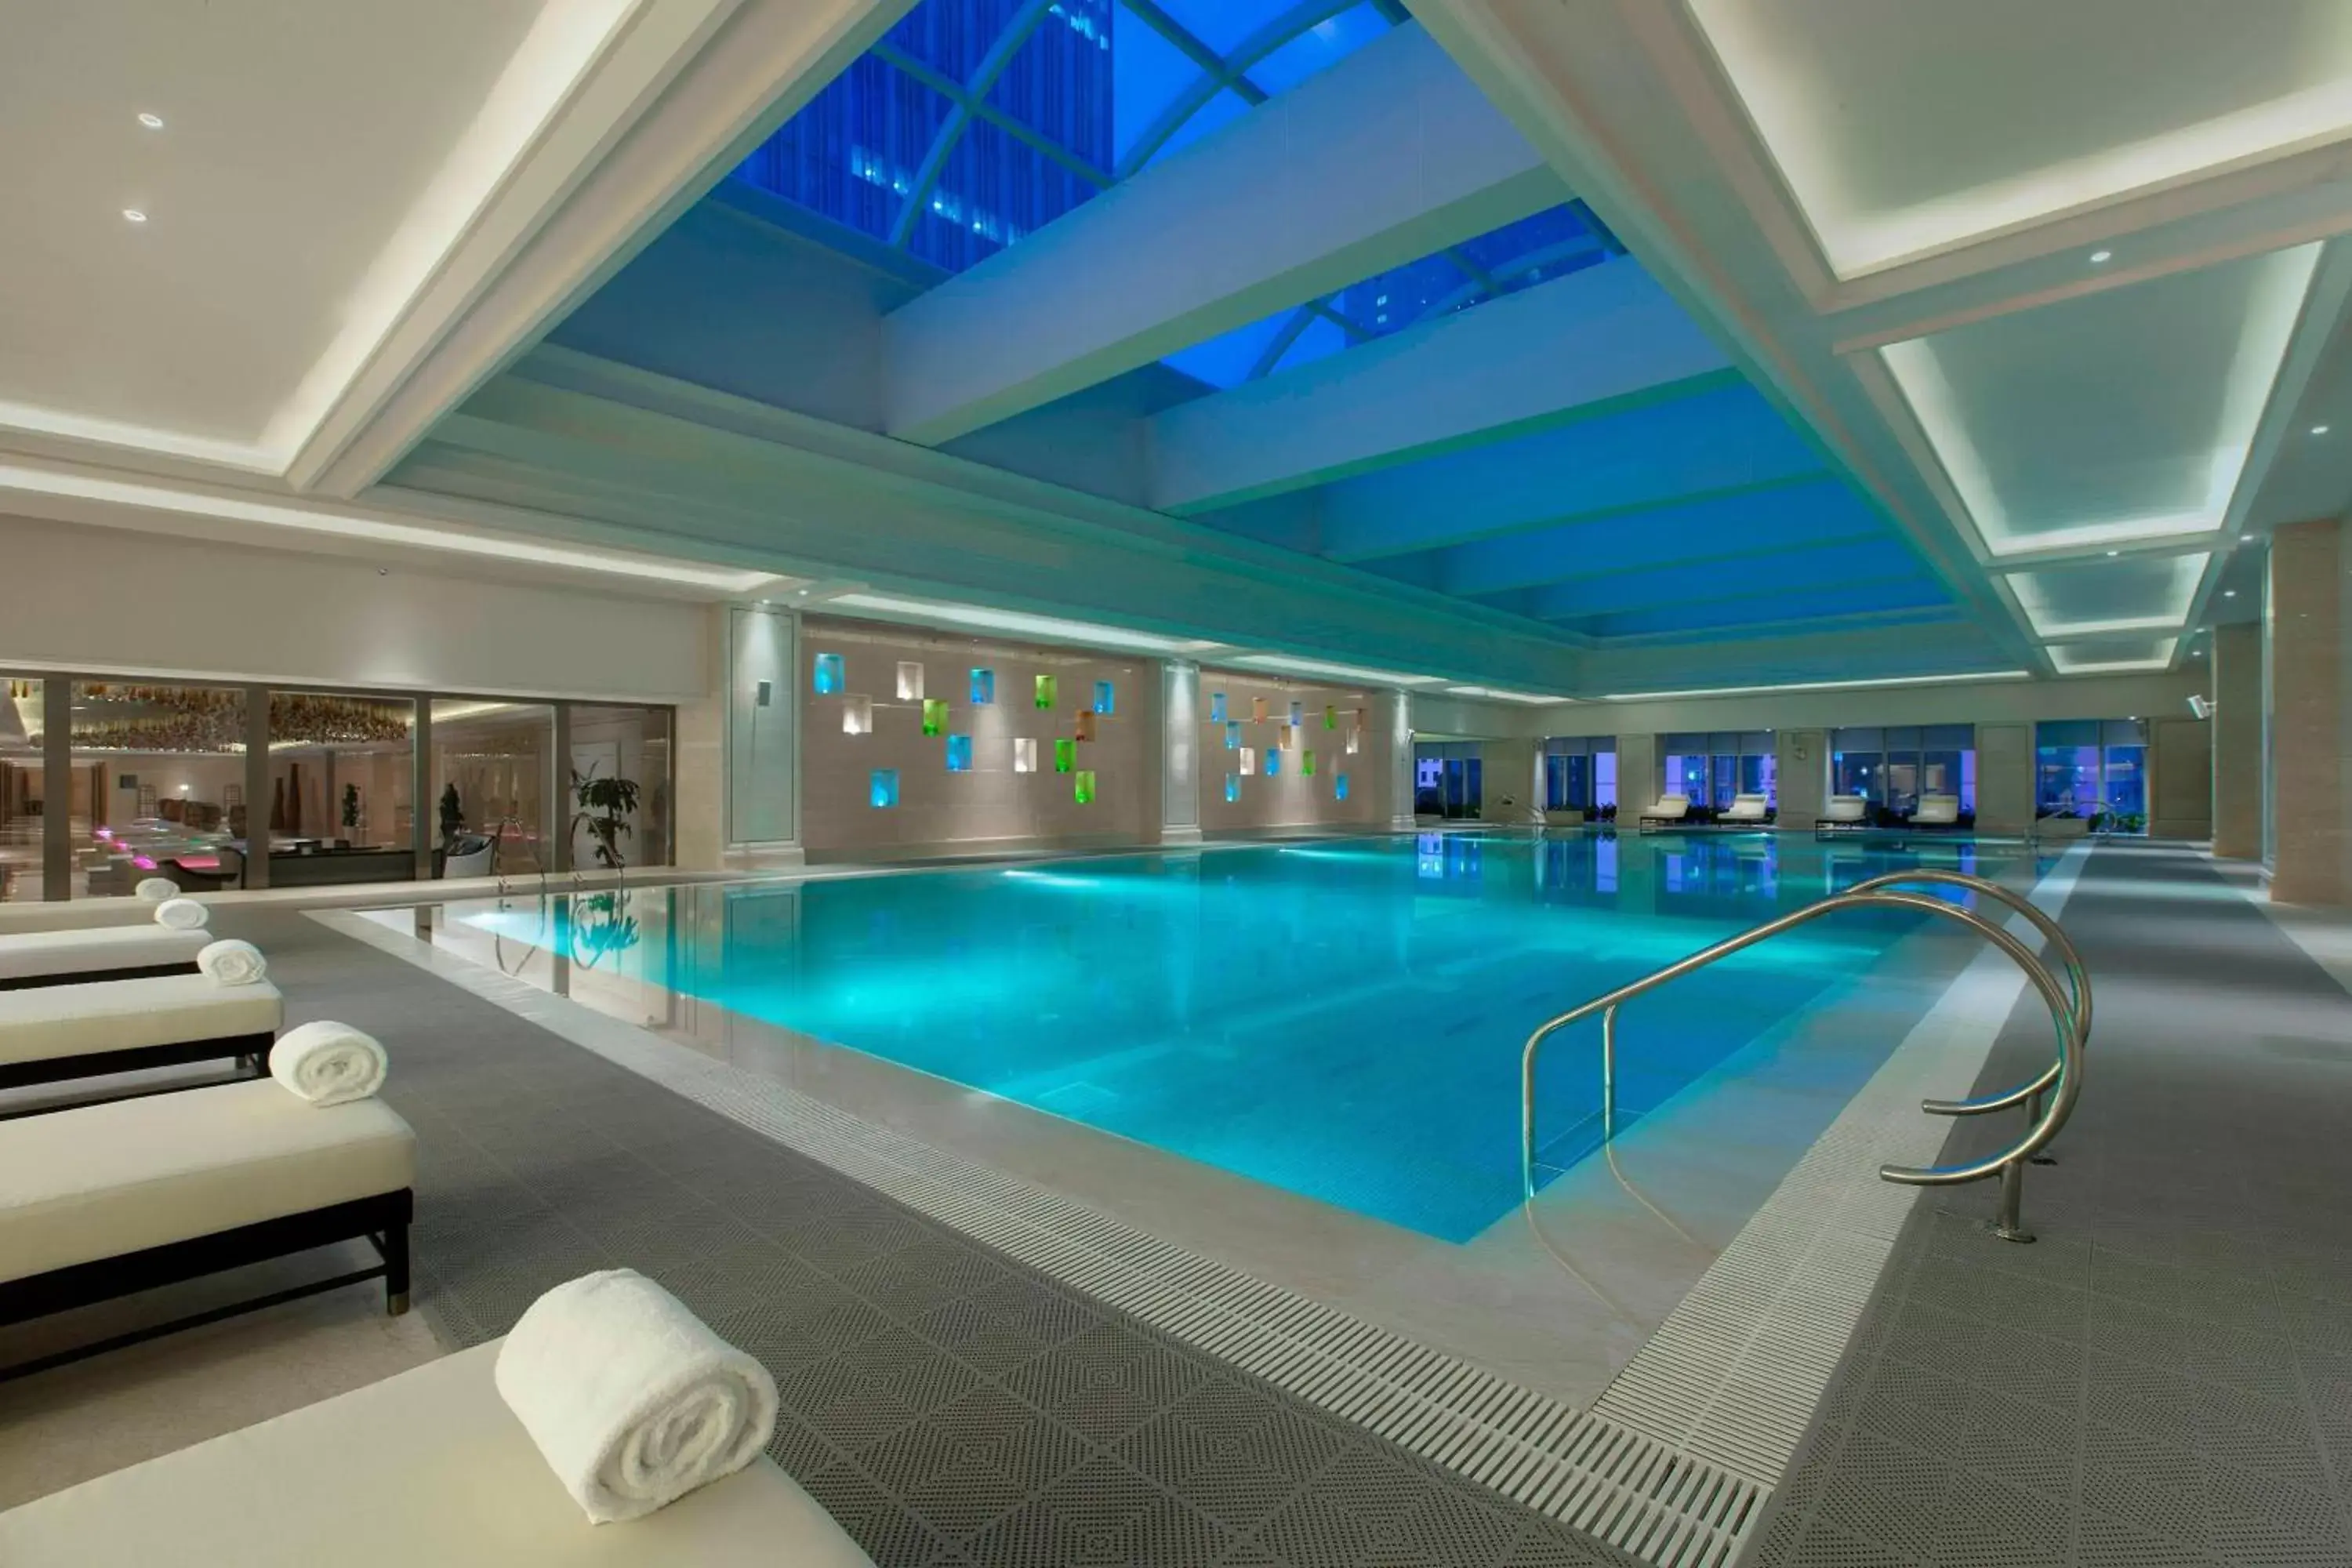 Swimming Pool in The Westin Qingdao - Instagrammable